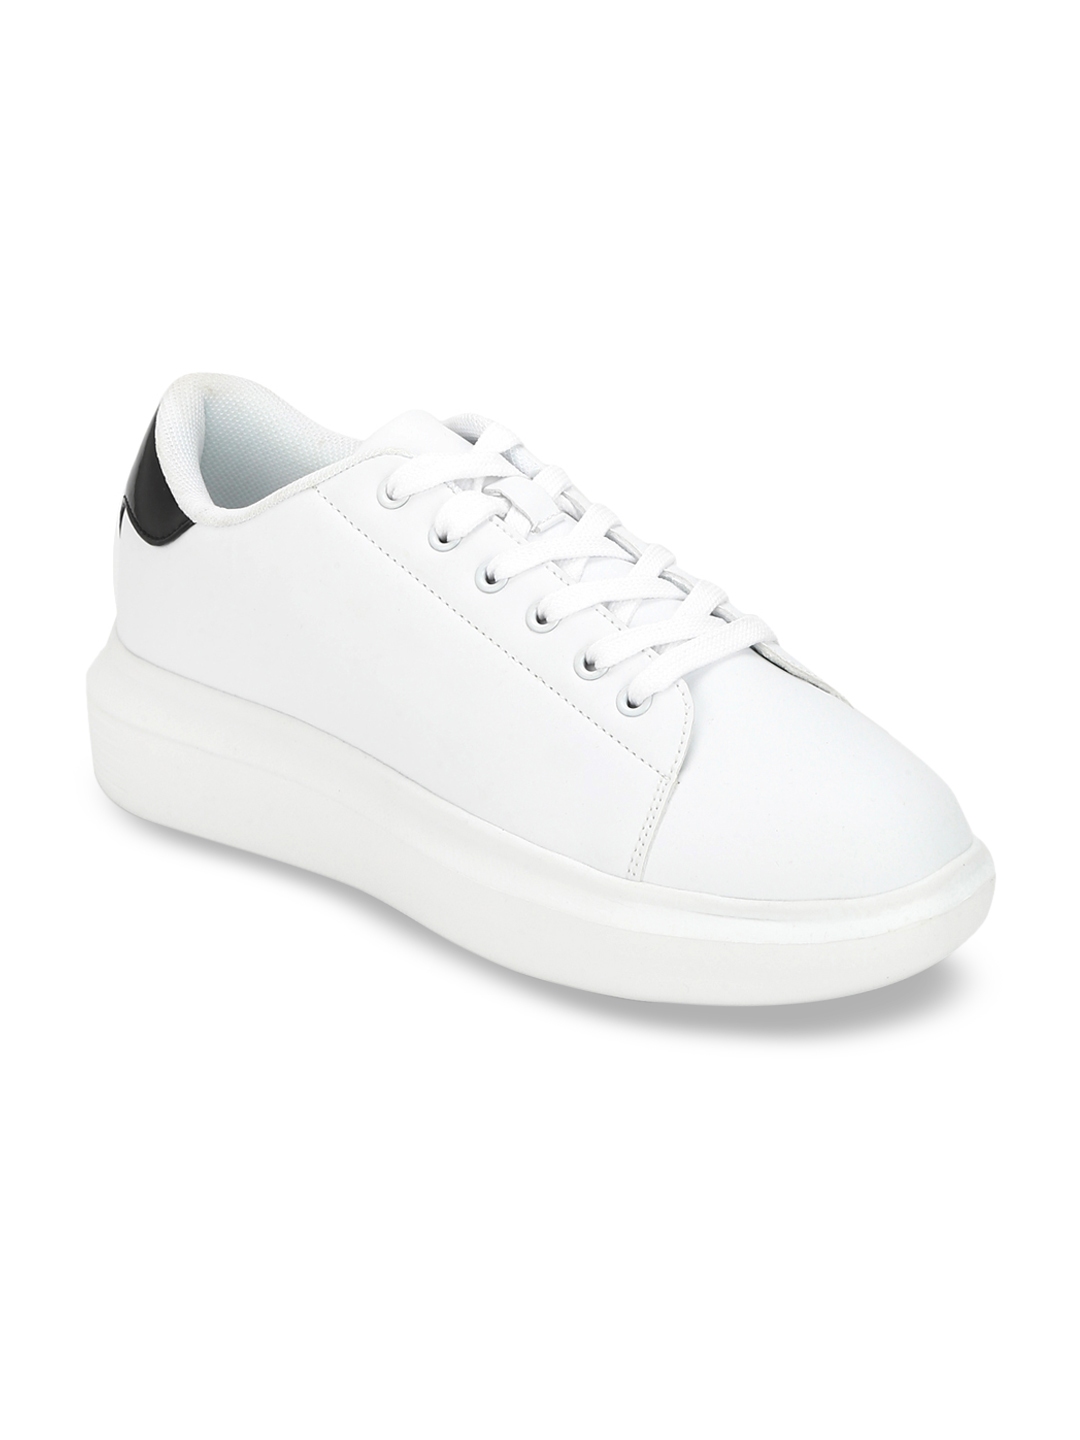 Buy Truffle Collection Men White Sneakers - Casual Shoes for Men ...